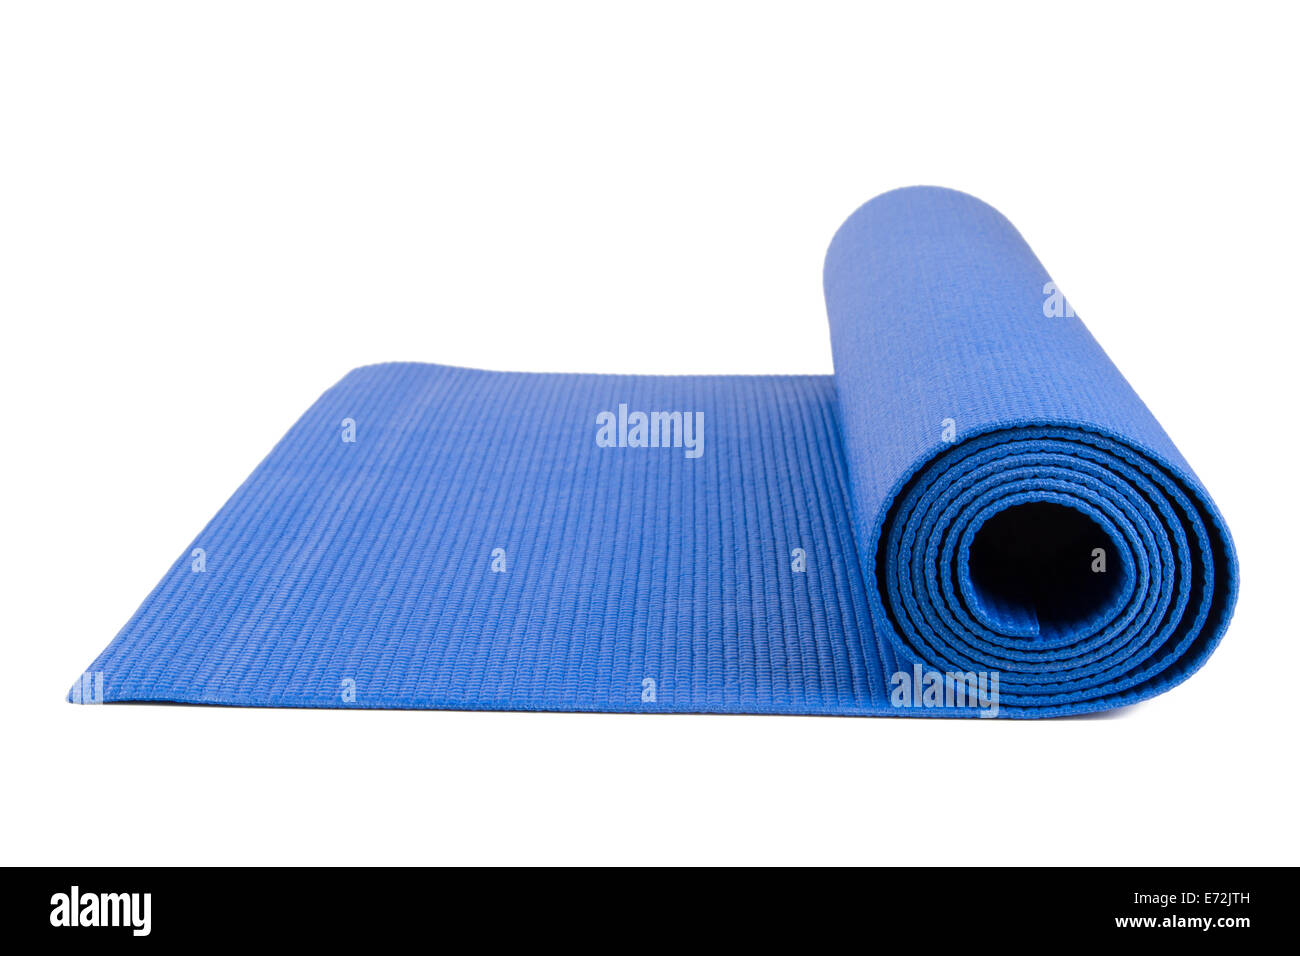 Close up view of blue open yoga mat for exercise, isolated on white background. Stock Photo